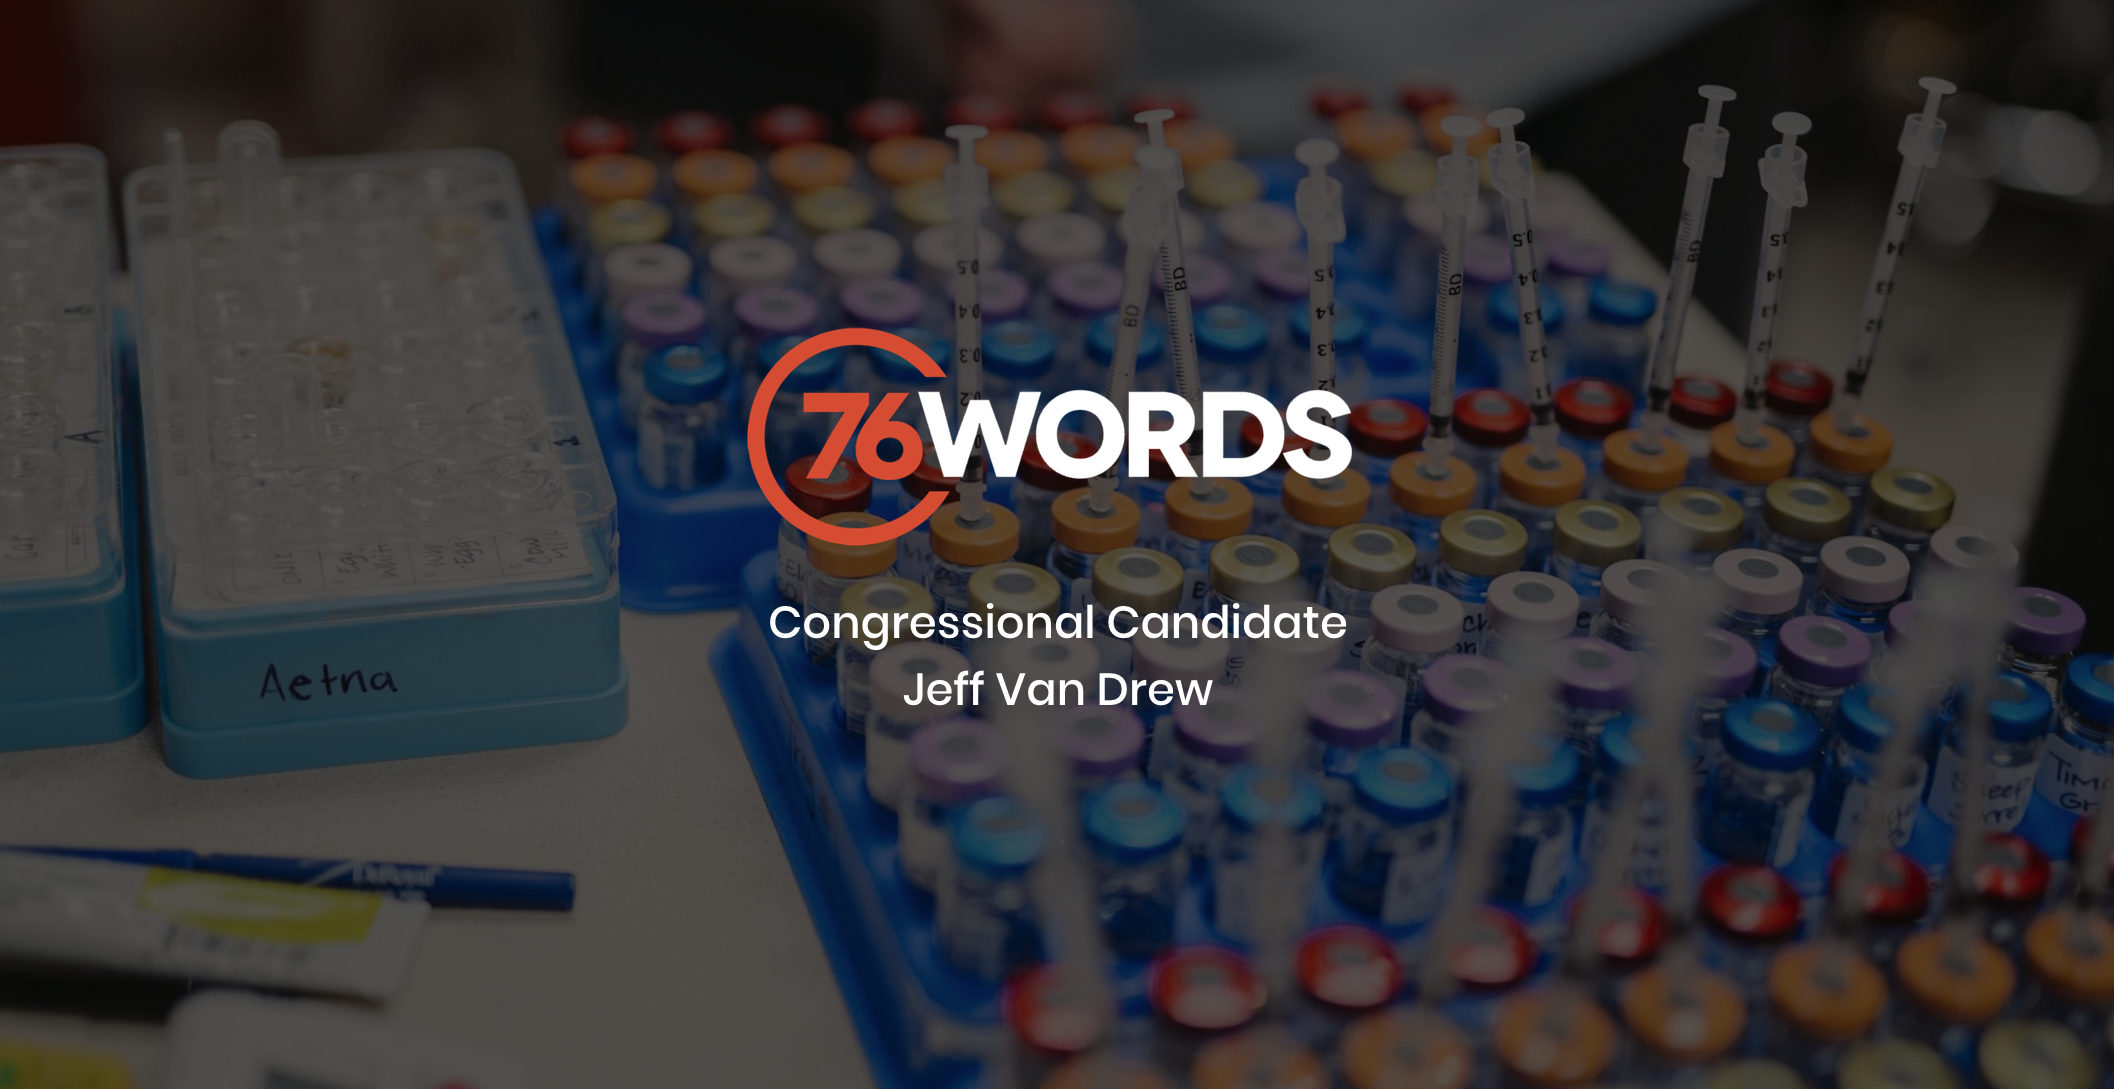 White and orange 76 Words Congressional Candidate Jeff Van Drew logo with dimmed background of display of medical vaccines in trays with needles